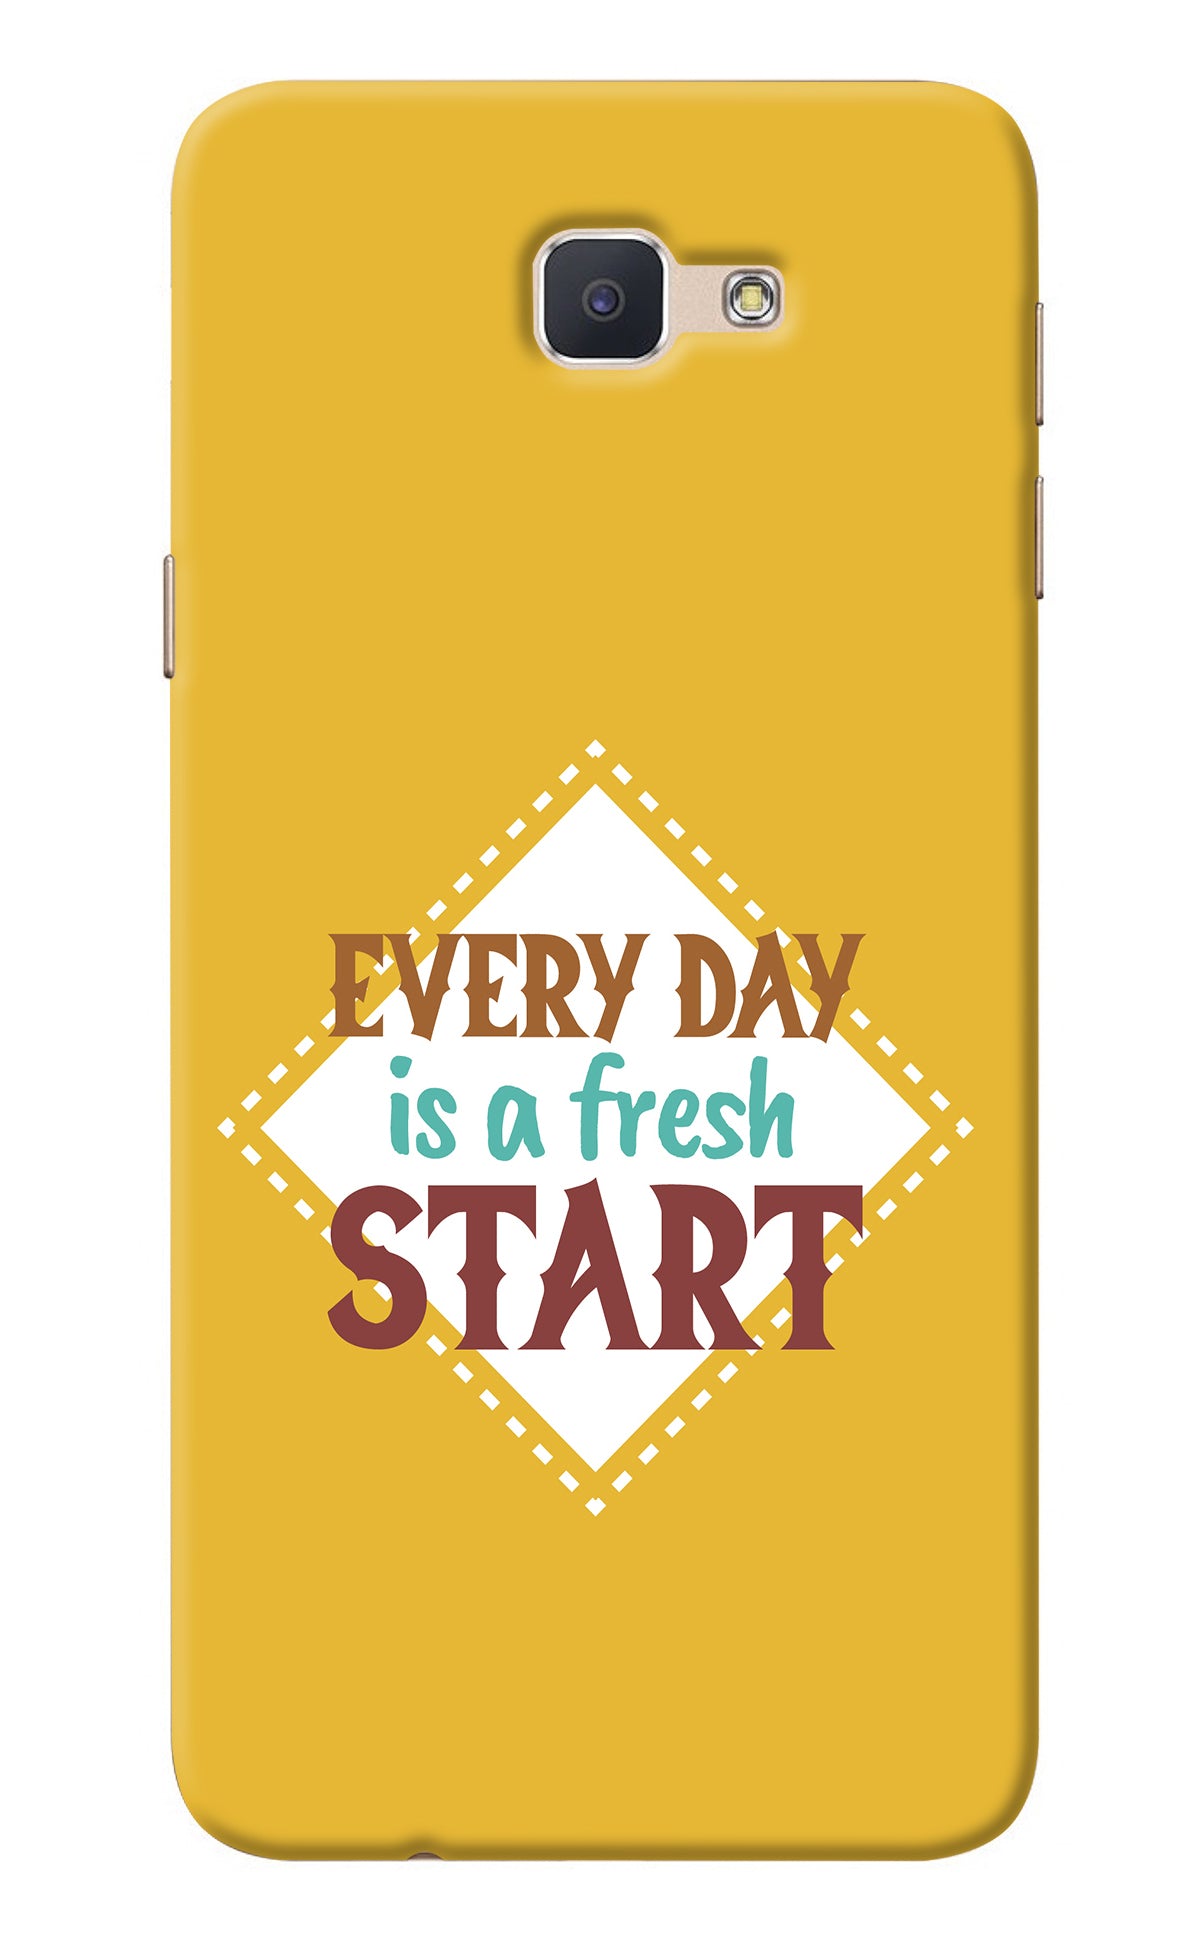 Every day is a Fresh Start Samsung J7 Prime Back Cover